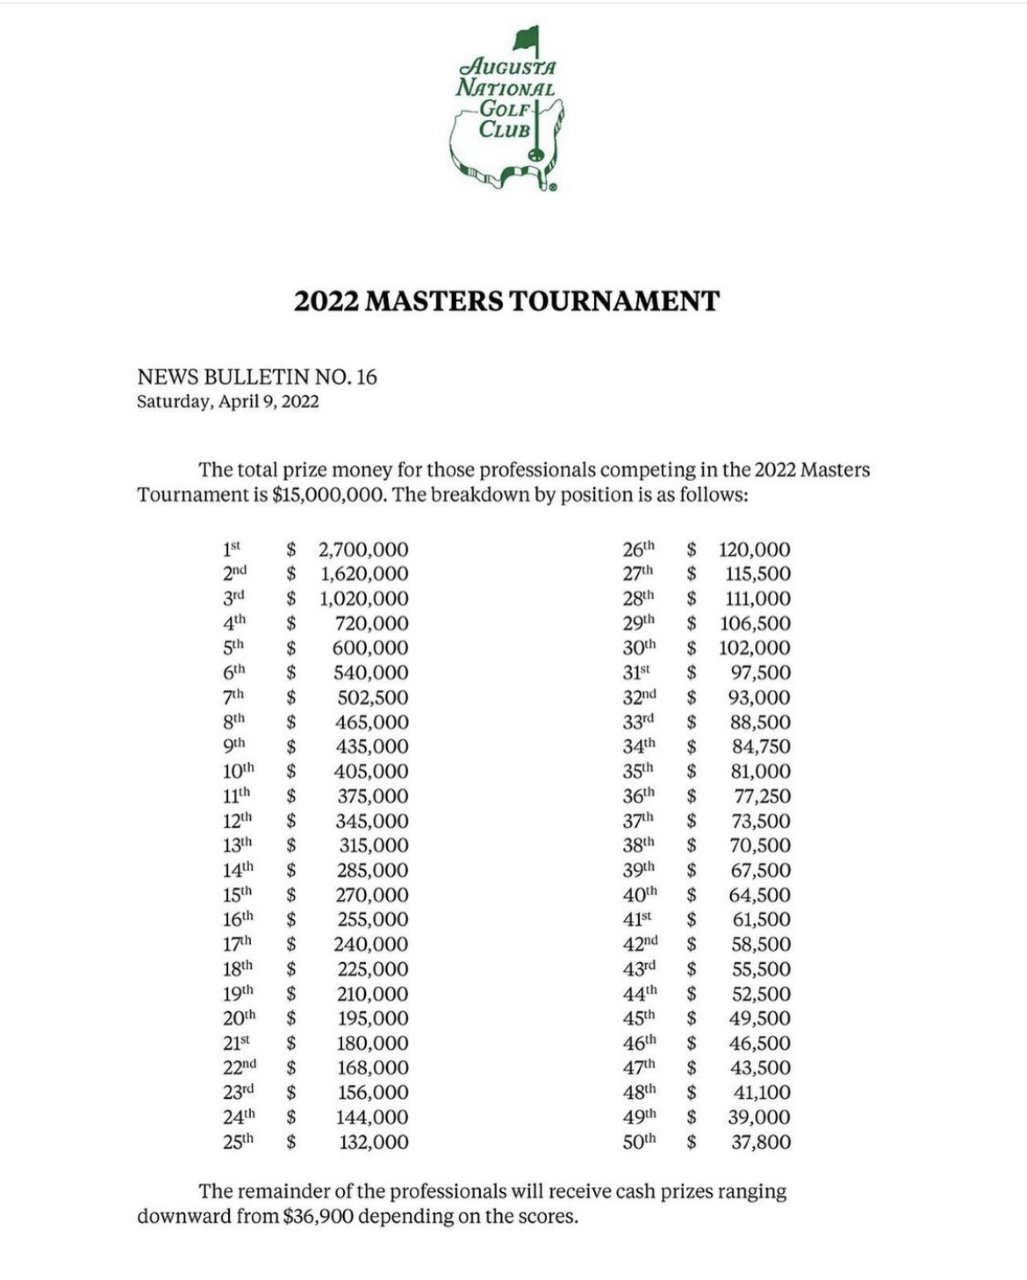 Caddie Network on Twitter "Official Payouts for the 2022 Masters